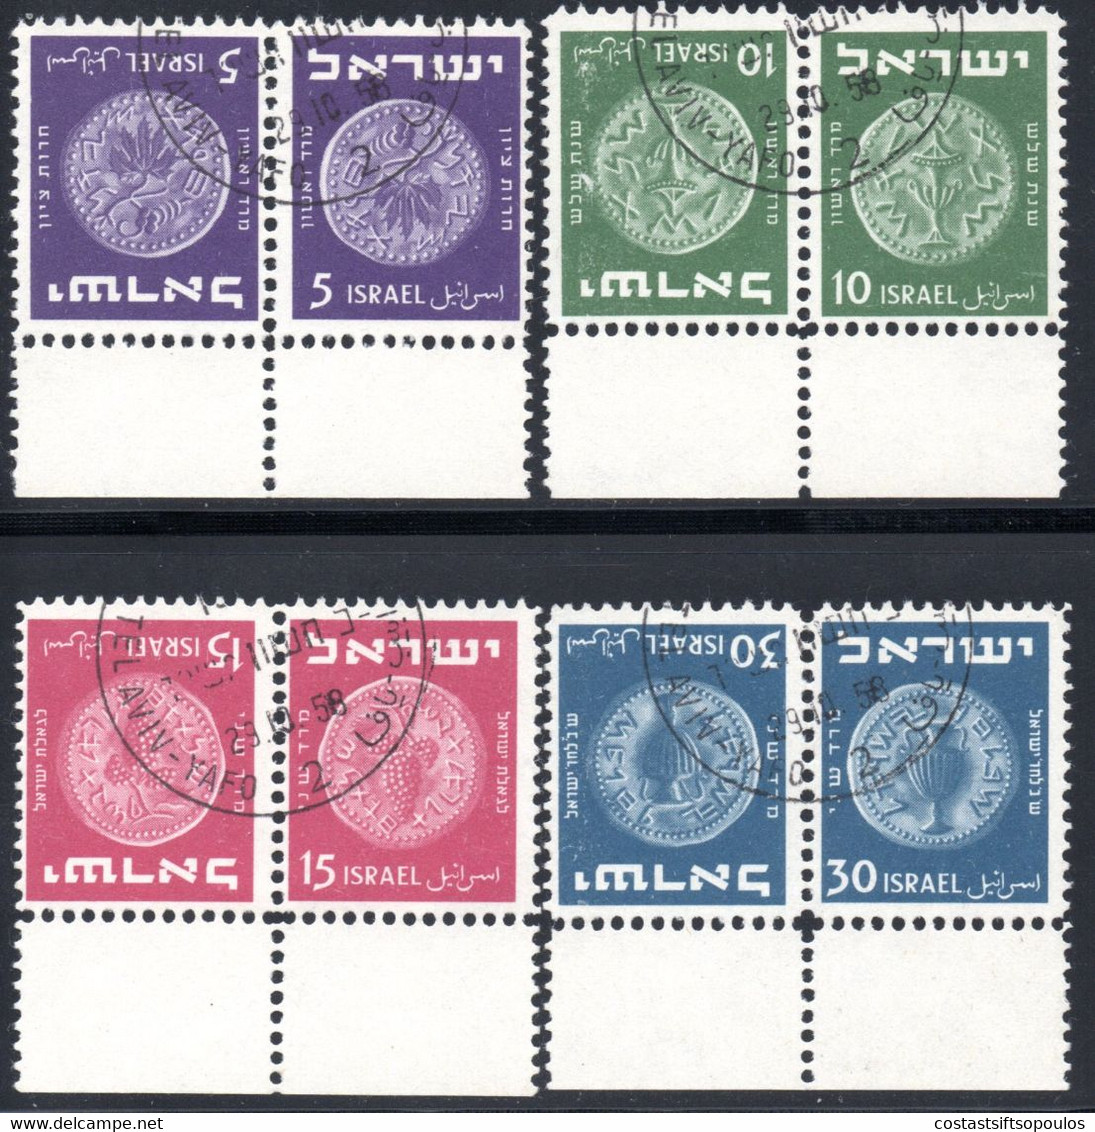 1080 ISRAEL 1949 COINS #21-26 GUTTER TETE BECHE AND TETE BECHE PAIRS,FINE USED - Used Stamps (without Tabs)